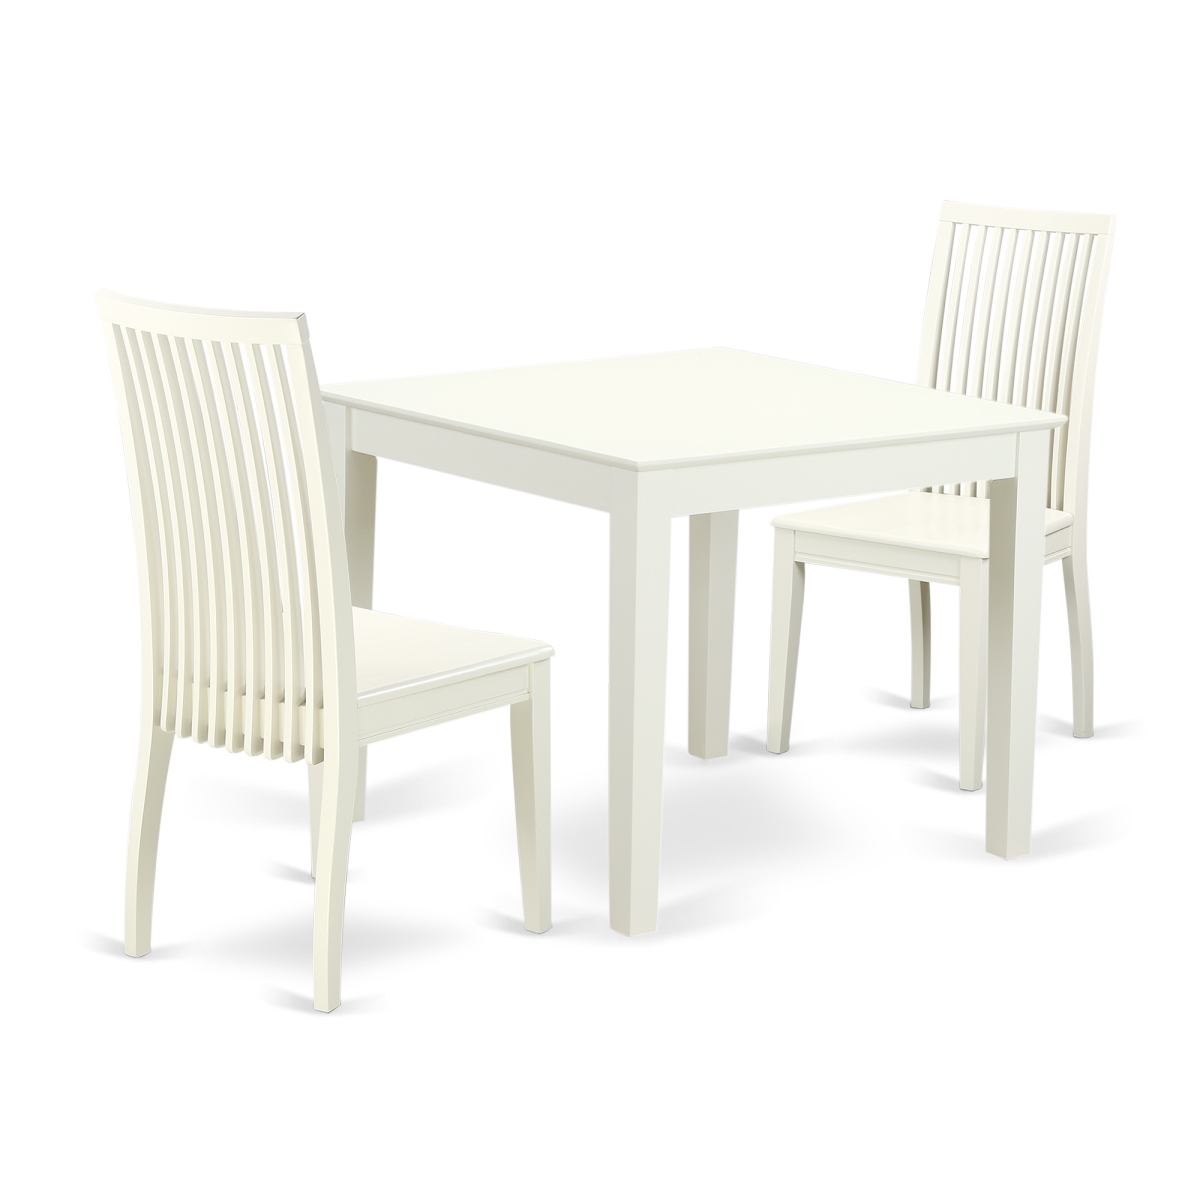 Oxip3-lwh-w 3 Piece Dinette Table Set, Linen White